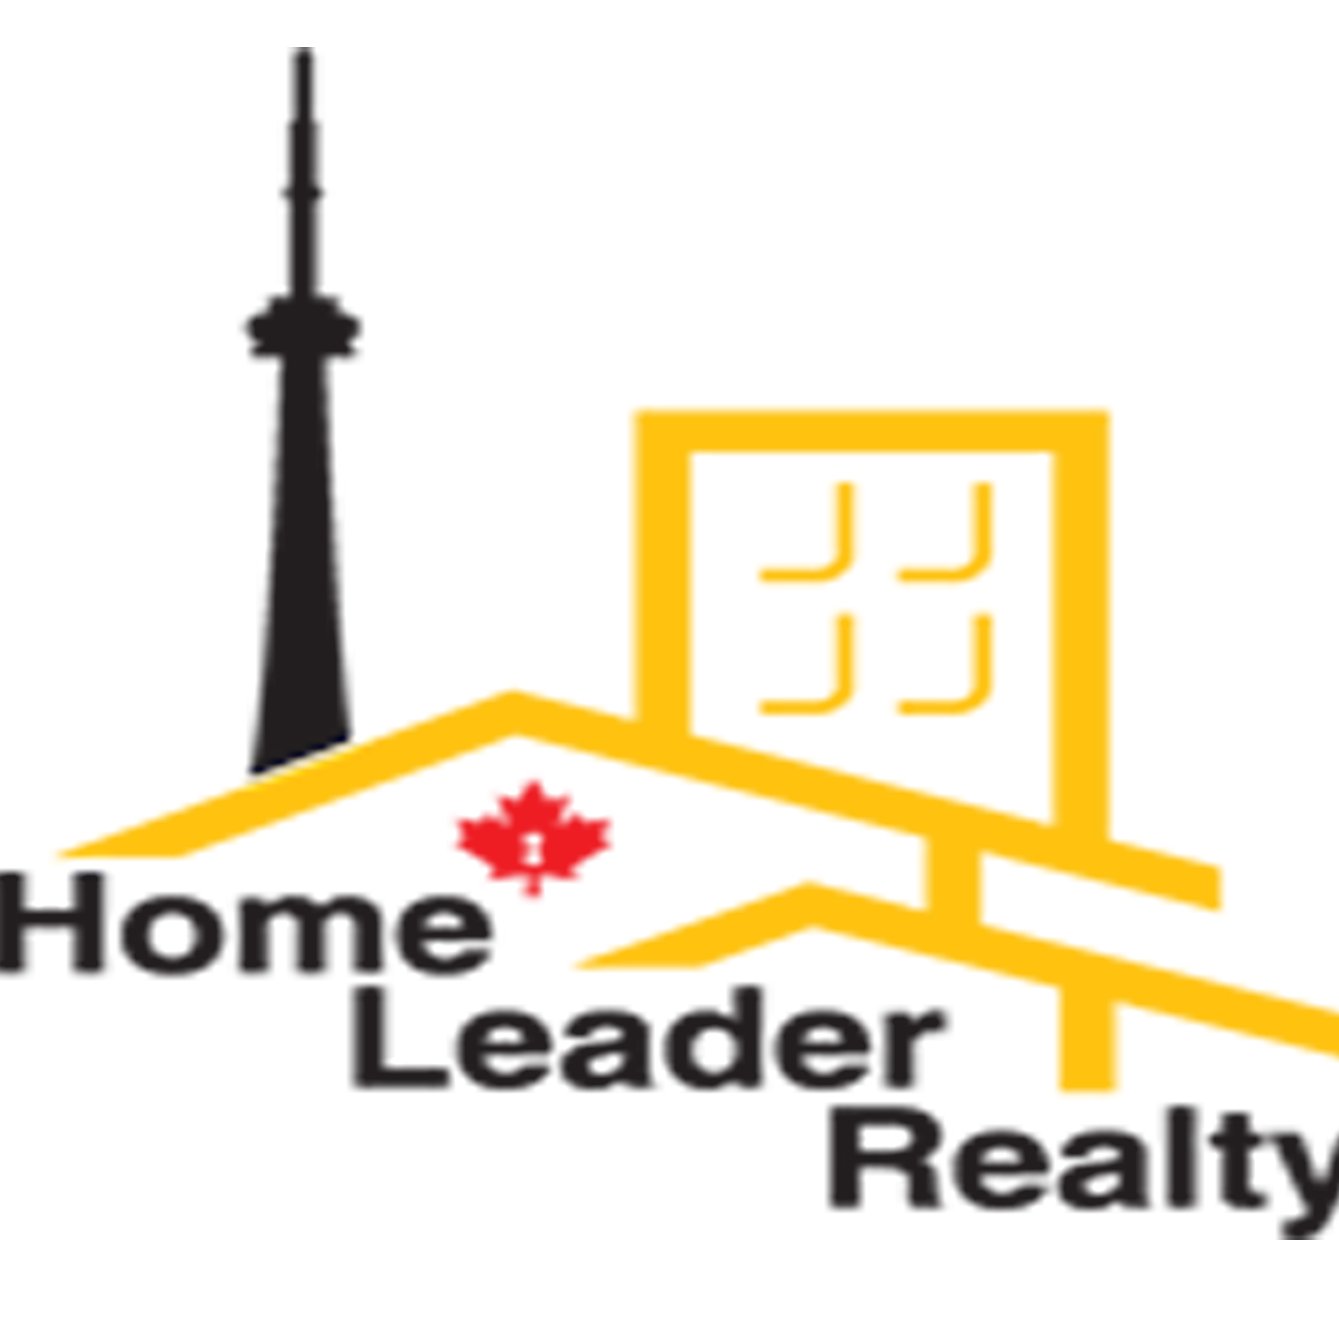 Homeleader Realty On Twitter I Added A Video To A Youtube